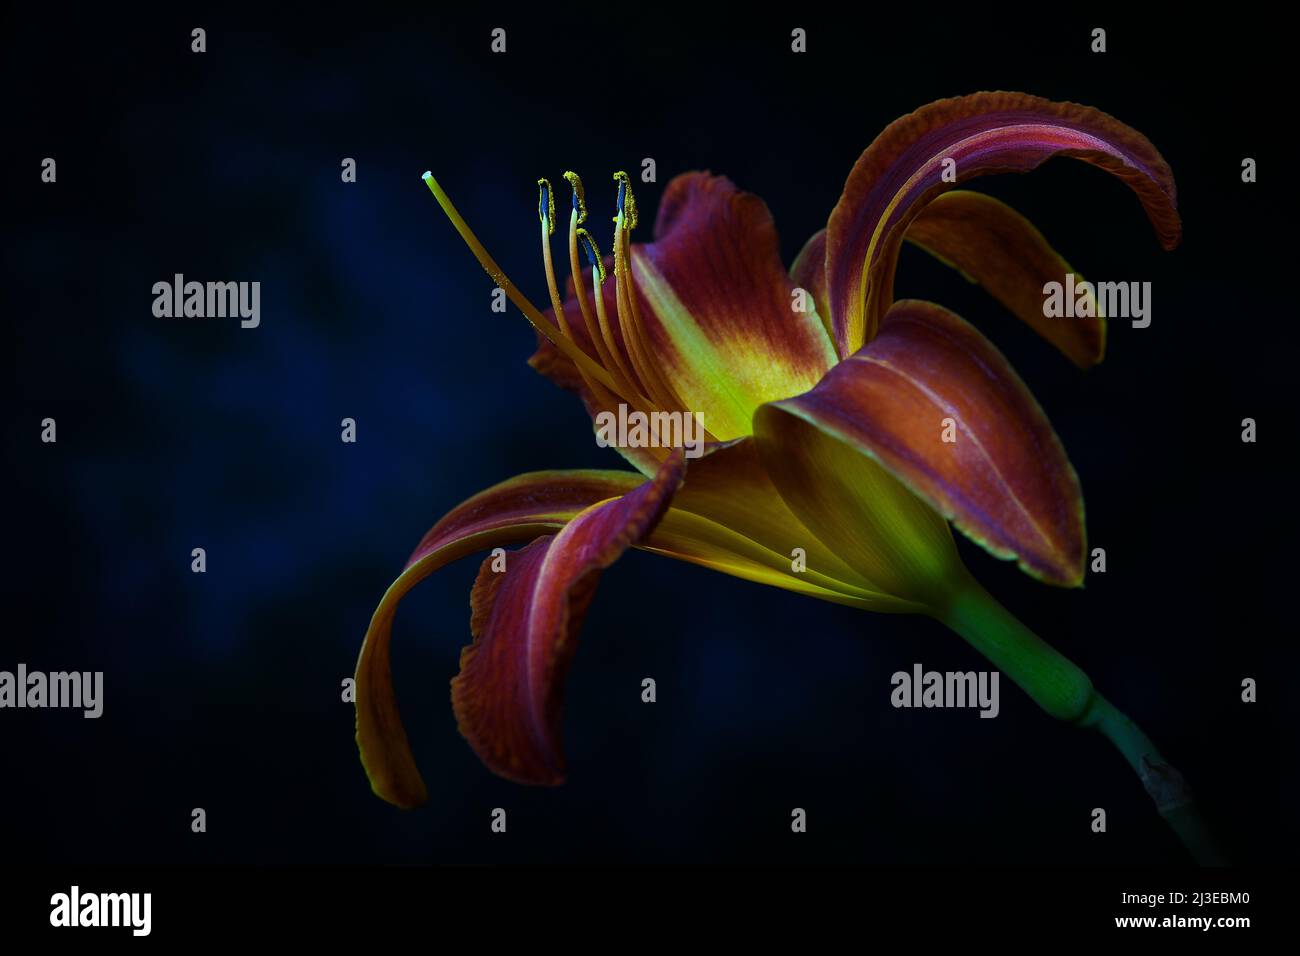 A rusty red coloured Day Lily -Hemerocallis family- flower in soft, strong dark mood lighting with the Stigma lit up; captured in a Studio Stock Photo